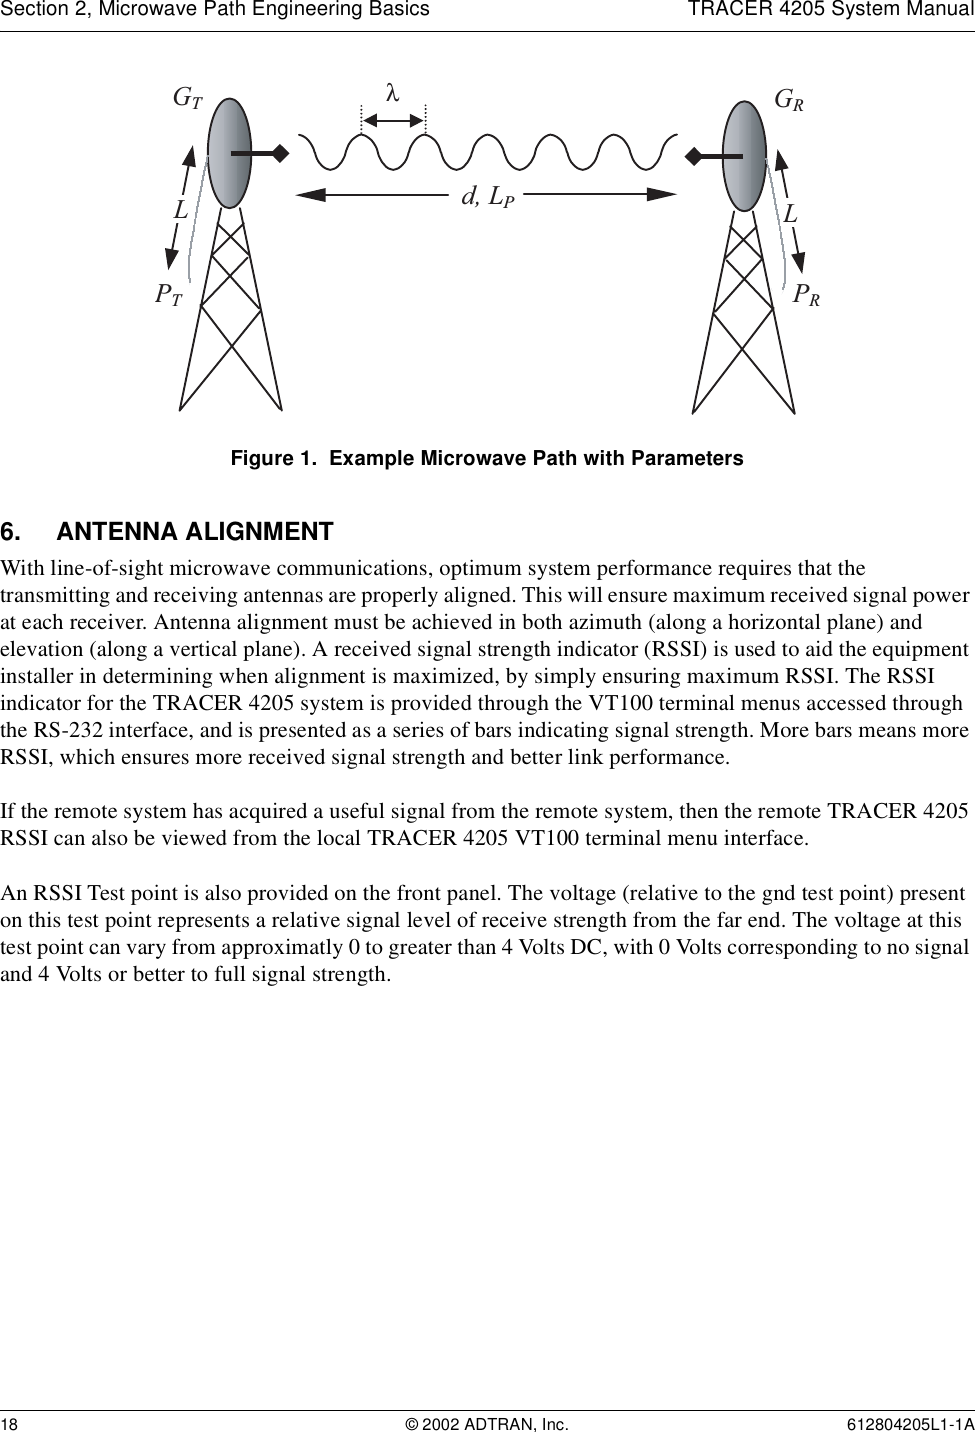 Section 2, Microwave Path Engineering Basics TRACER 4205 System Manual18 © 2002 ADTRAN, Inc. 612804205L1-1AFigure 1.  Example Microwave Path with Parameters6. ANTENNA ALIGNMENTWith line-of-sight microwave communications, optimum system performance requires that the transmitting and receiving antennas are properly aligned. This will ensure maximum received signal power at each receiver. Antenna alignment must be achieved in both azimuth (along a horizontal plane) and elevation (along a vertical plane). A received signal strength indicator (RSSI) is used to aid the equipment installer in determining when alignment is maximized, by simply ensuring maximum RSSI. The RSSI indicator for the TRACER 4205 system is provided through the VT100 terminal menus accessed through the RS-232 interface, and is presented as a series of bars indicating signal strength. More bars means more RSSI, which ensures more received signal strength and better link performance.If the remote system has acquired a useful signal from the remote system, then the remote TRACER 4205 RSSI can also be viewed from the local TRACER 4205 VT100 terminal menu interface.An RSSI Test point is also provided on the front panel. The voltage (relative to the gnd test point) present on this test point represents a relative signal level of receive strength from the far end. The voltage at this test point can vary from approximatly 0 to greater than 4 Volts DC, with 0 Volts corresponding to no signal and 4 Volts or better to full signal strength. GTGRd, LPPTPRλLL